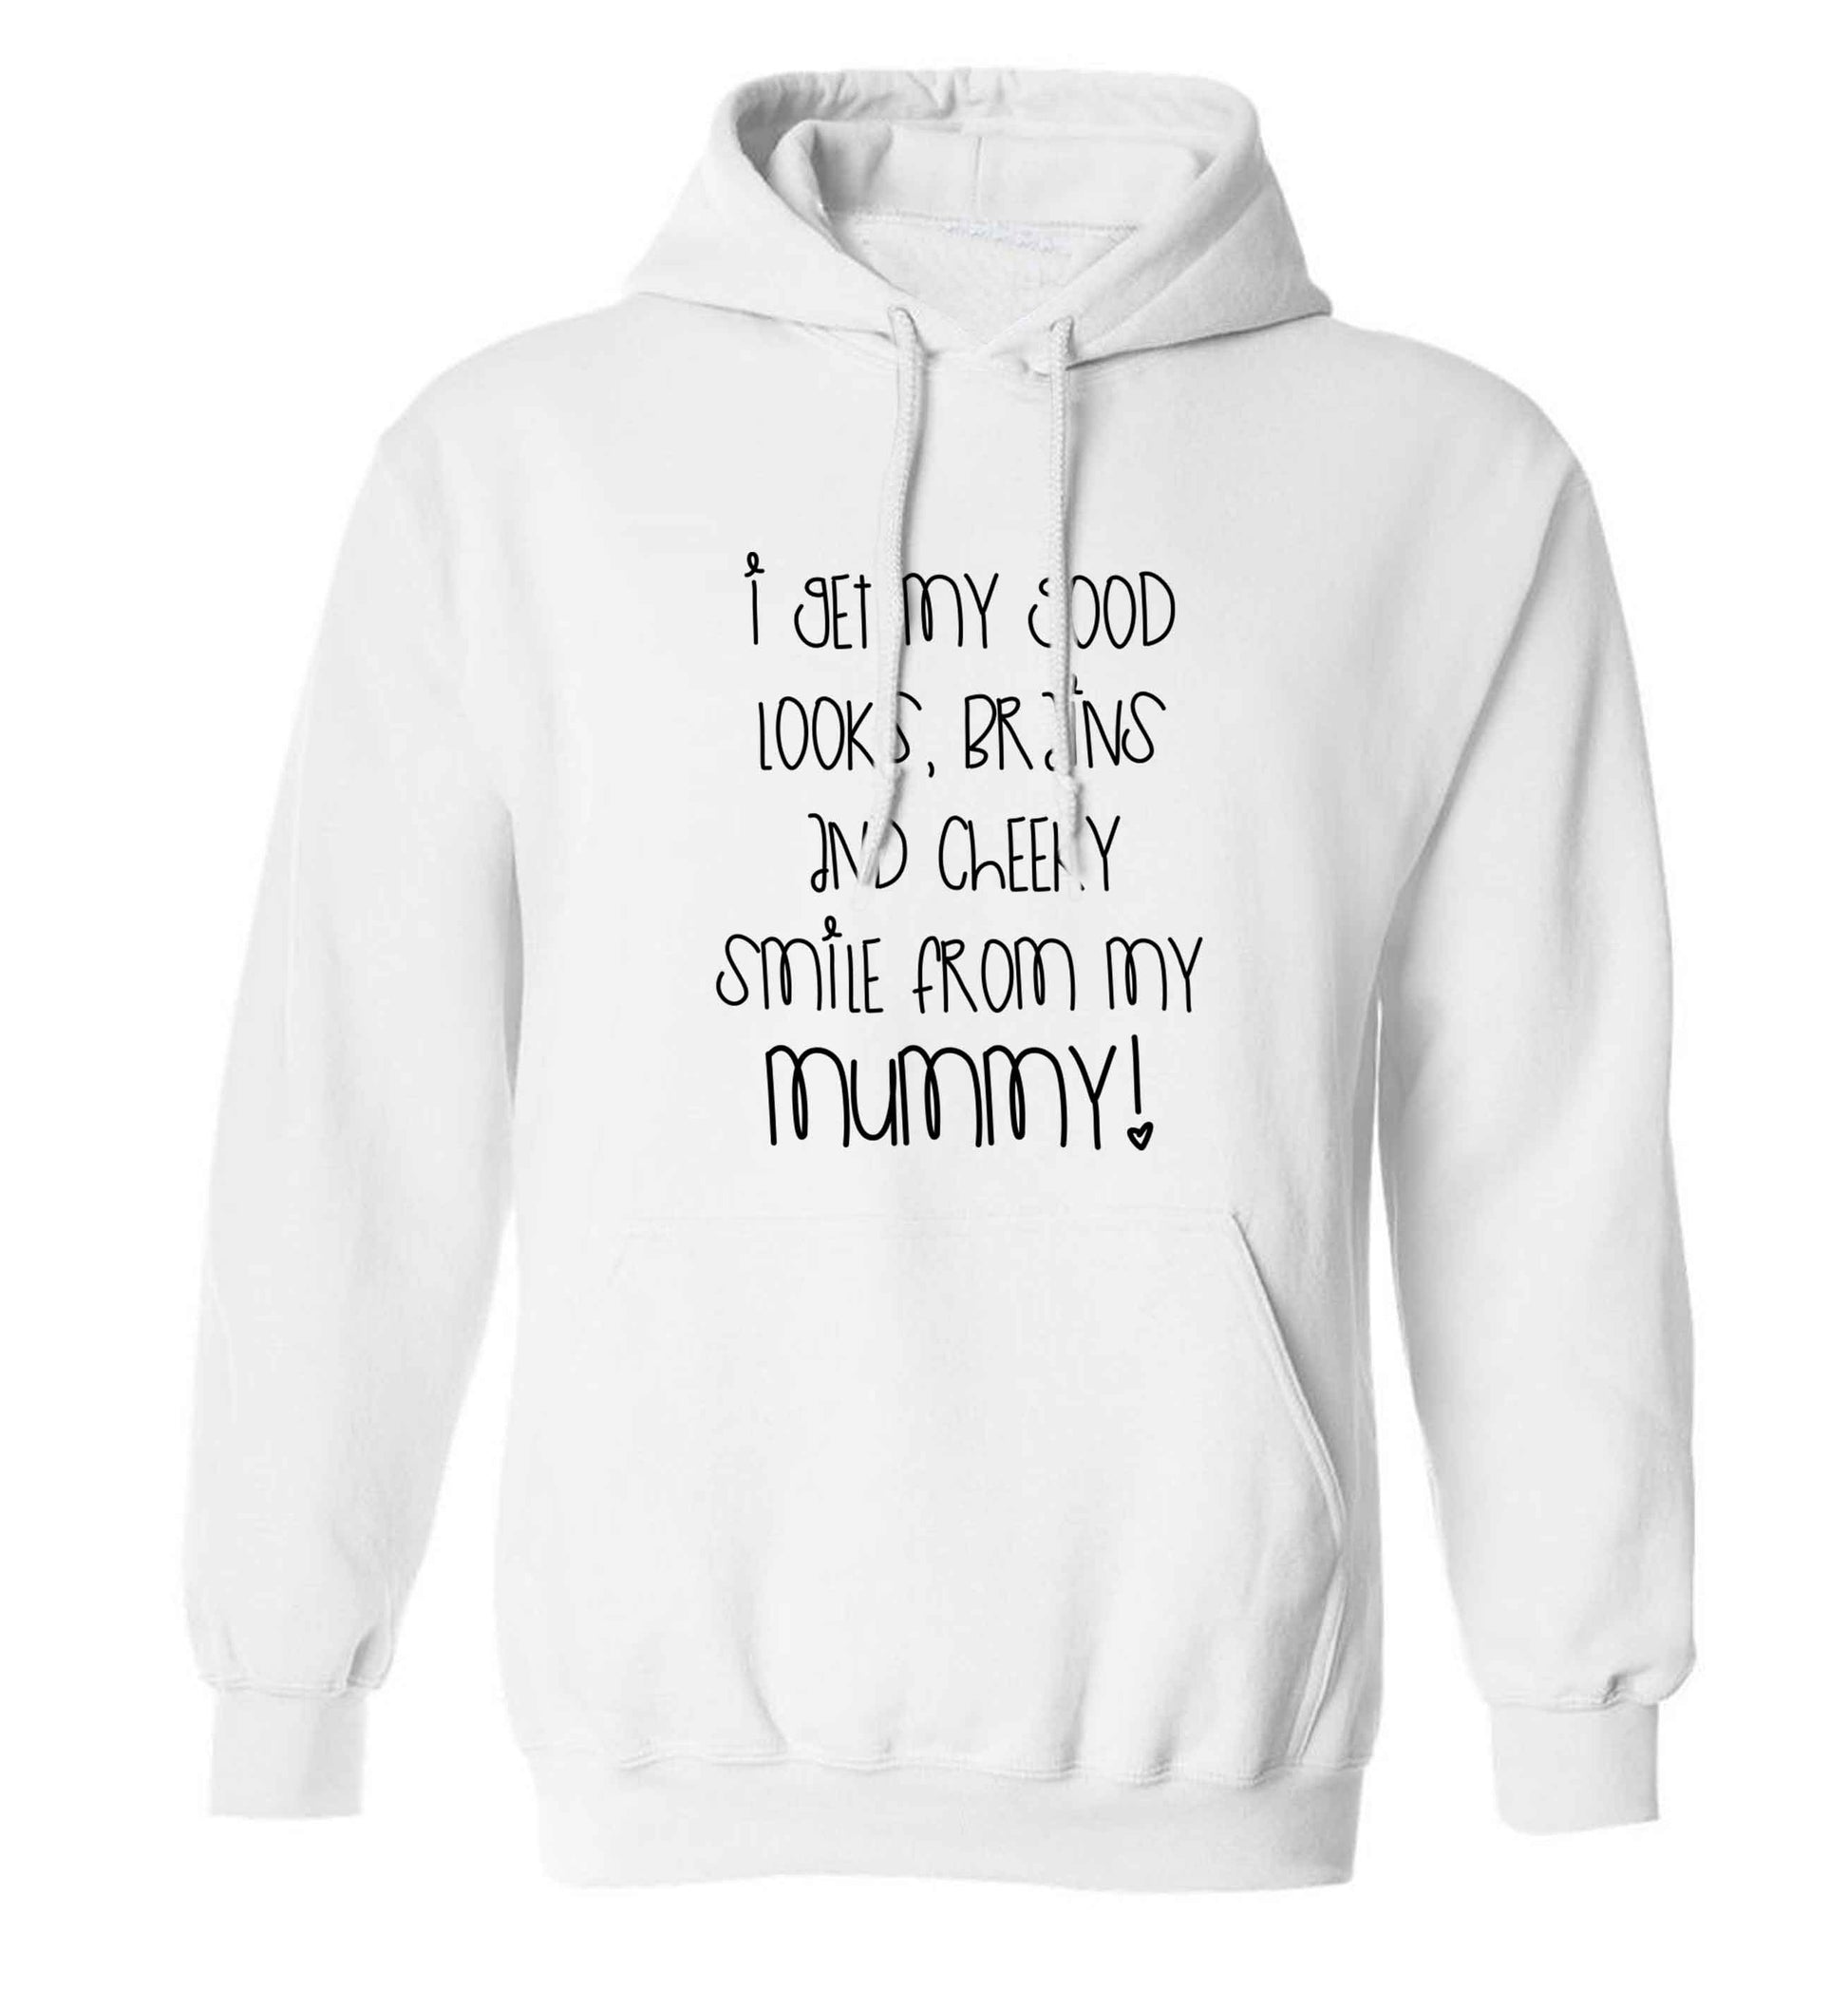 I get my good looks, brains and cheeky smile from my mummy adults unisex white hoodie 2XL